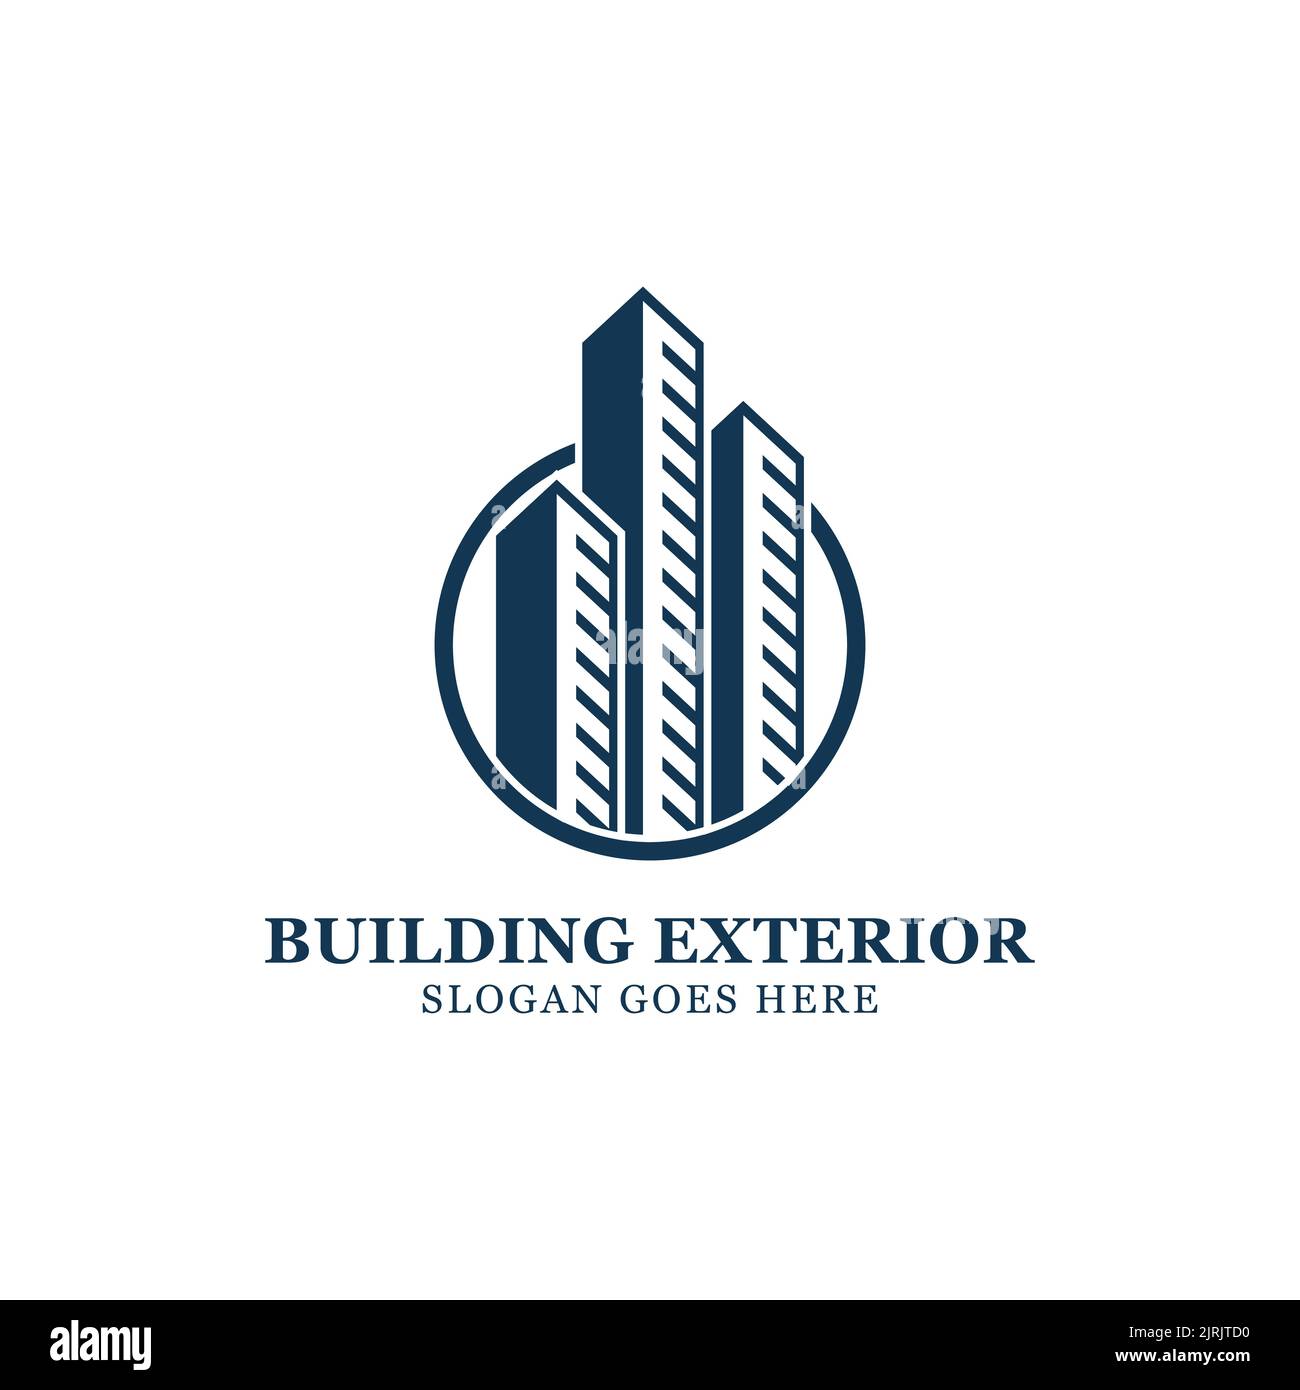 Building exterior logo illustration vector design inspirations with circle shape. Good for construction, real estate, skyscraper and business company Stock Vector